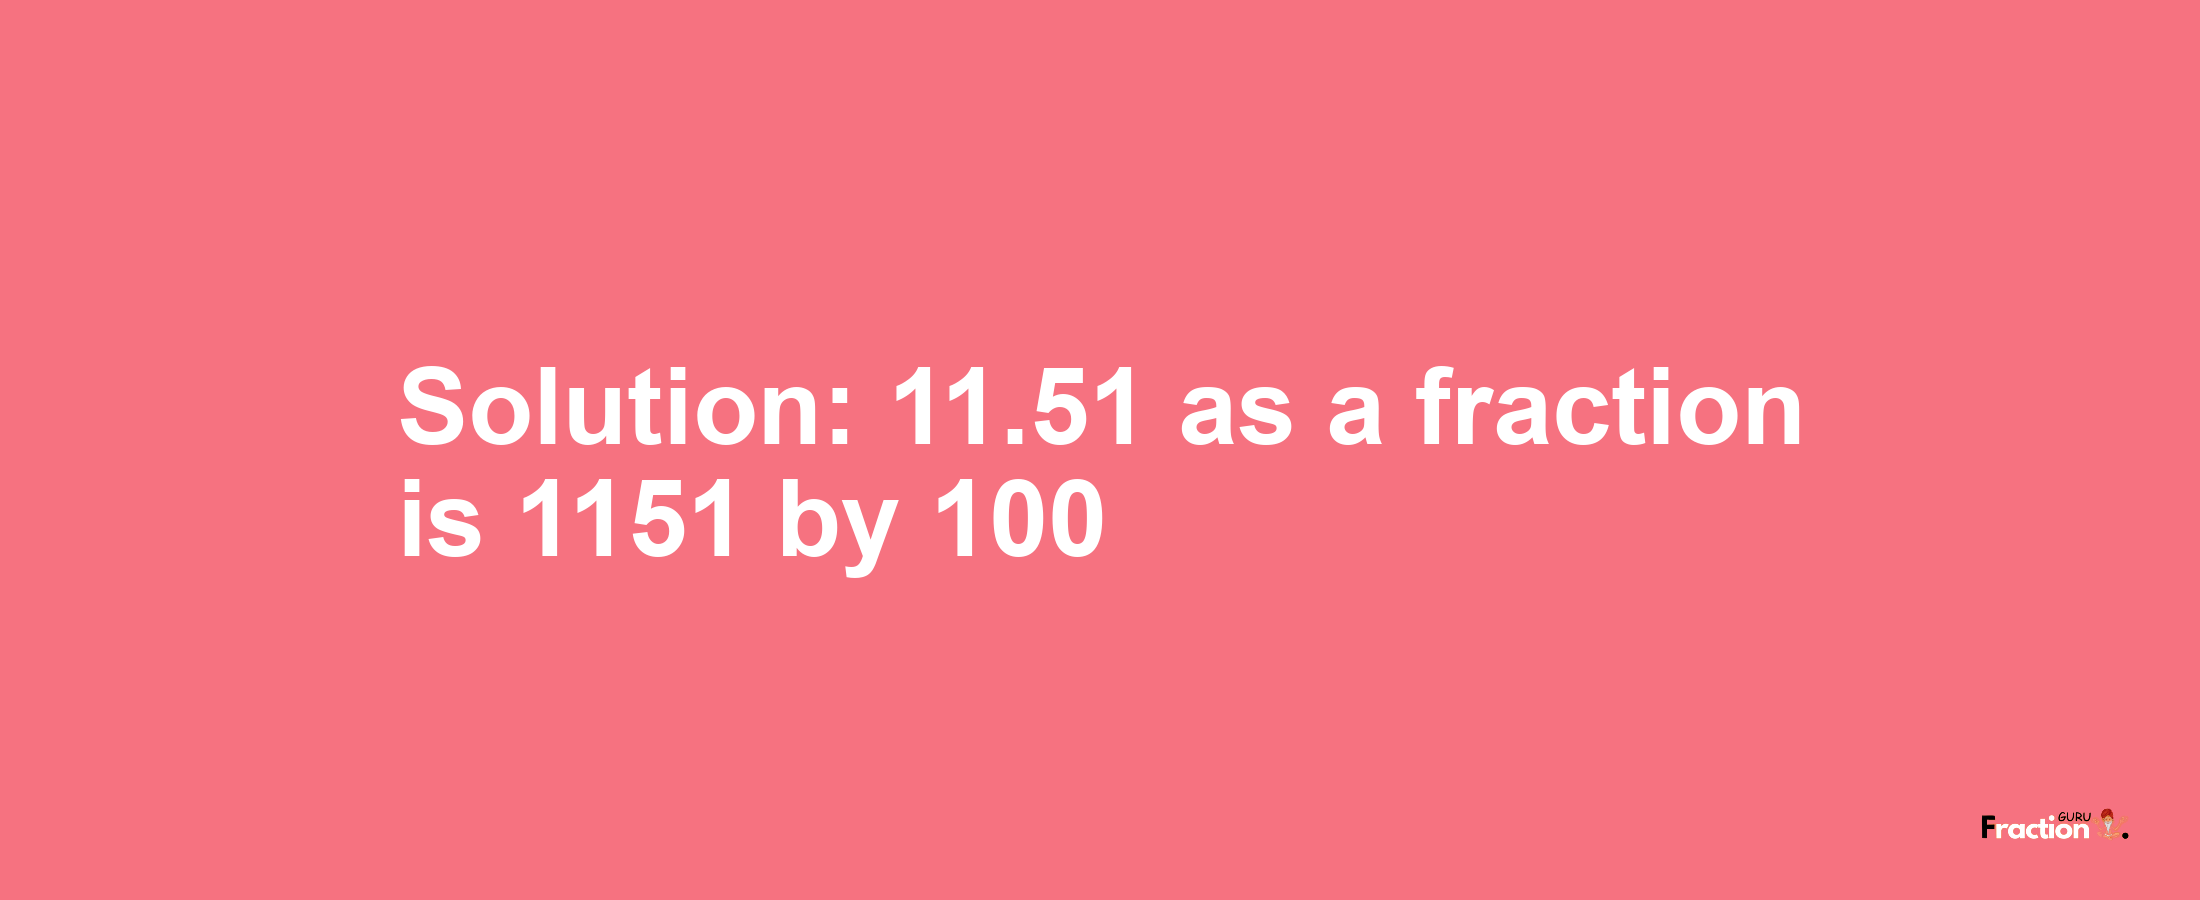 Solution:11.51 as a fraction is 1151/100